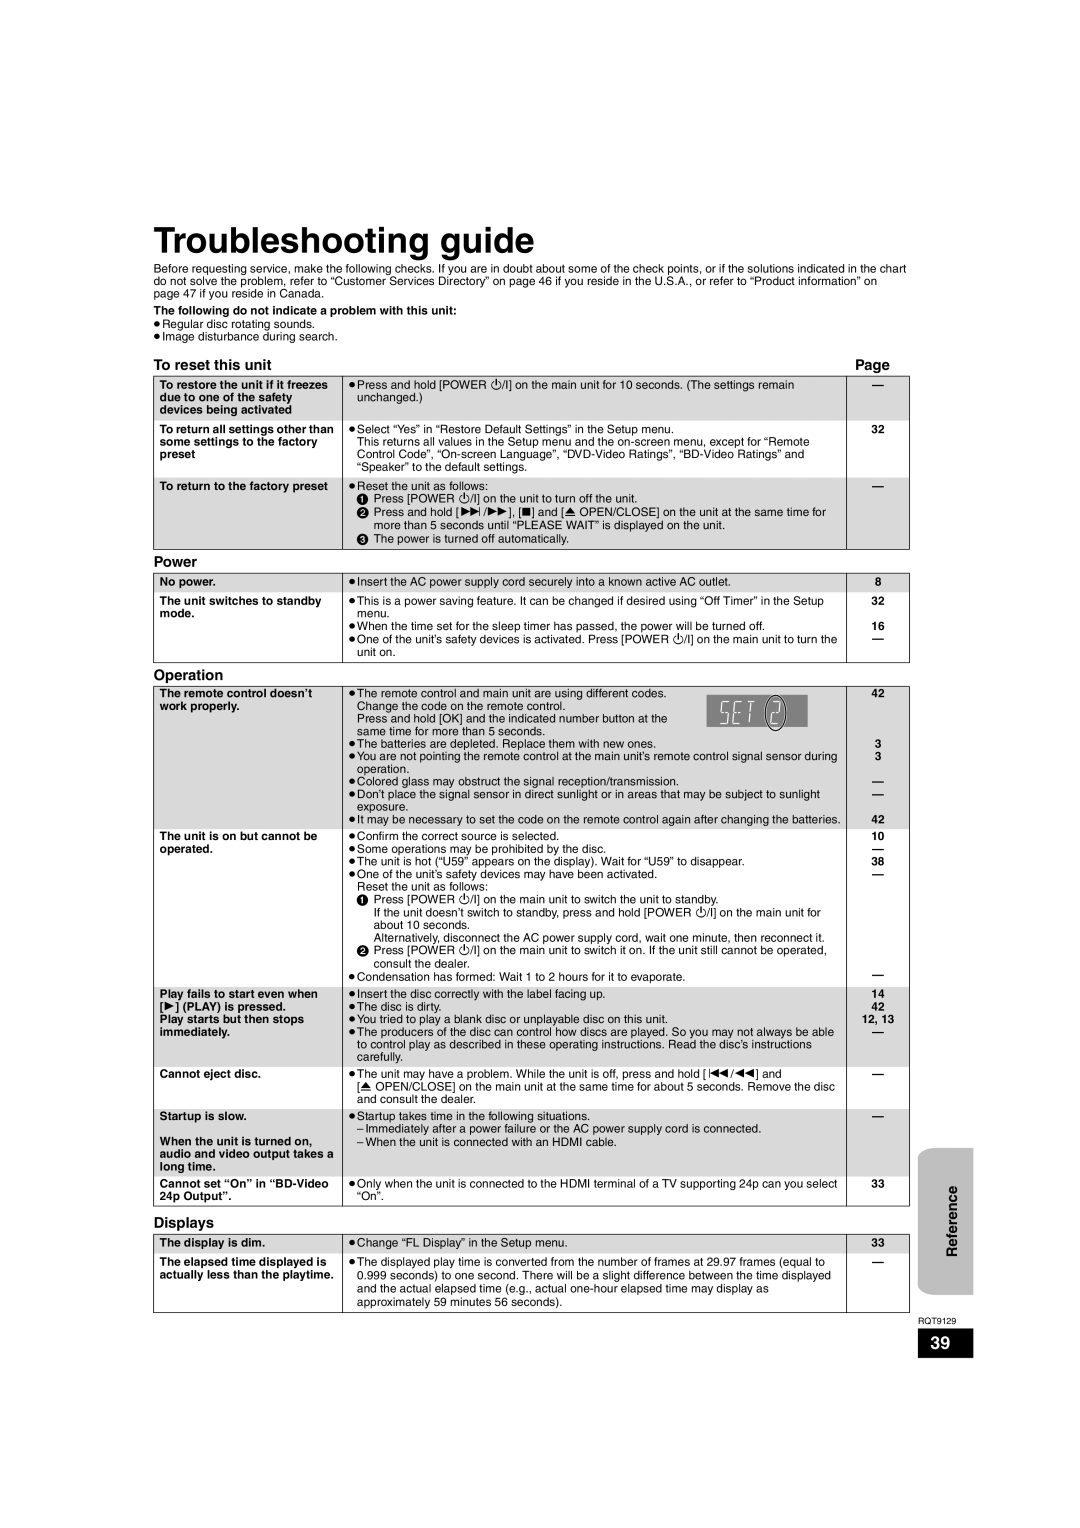 Panasonic SC-BT100 warranty Troubleshooting guide, To reset this unit, Power, Operation, Displays, Page, Reference 